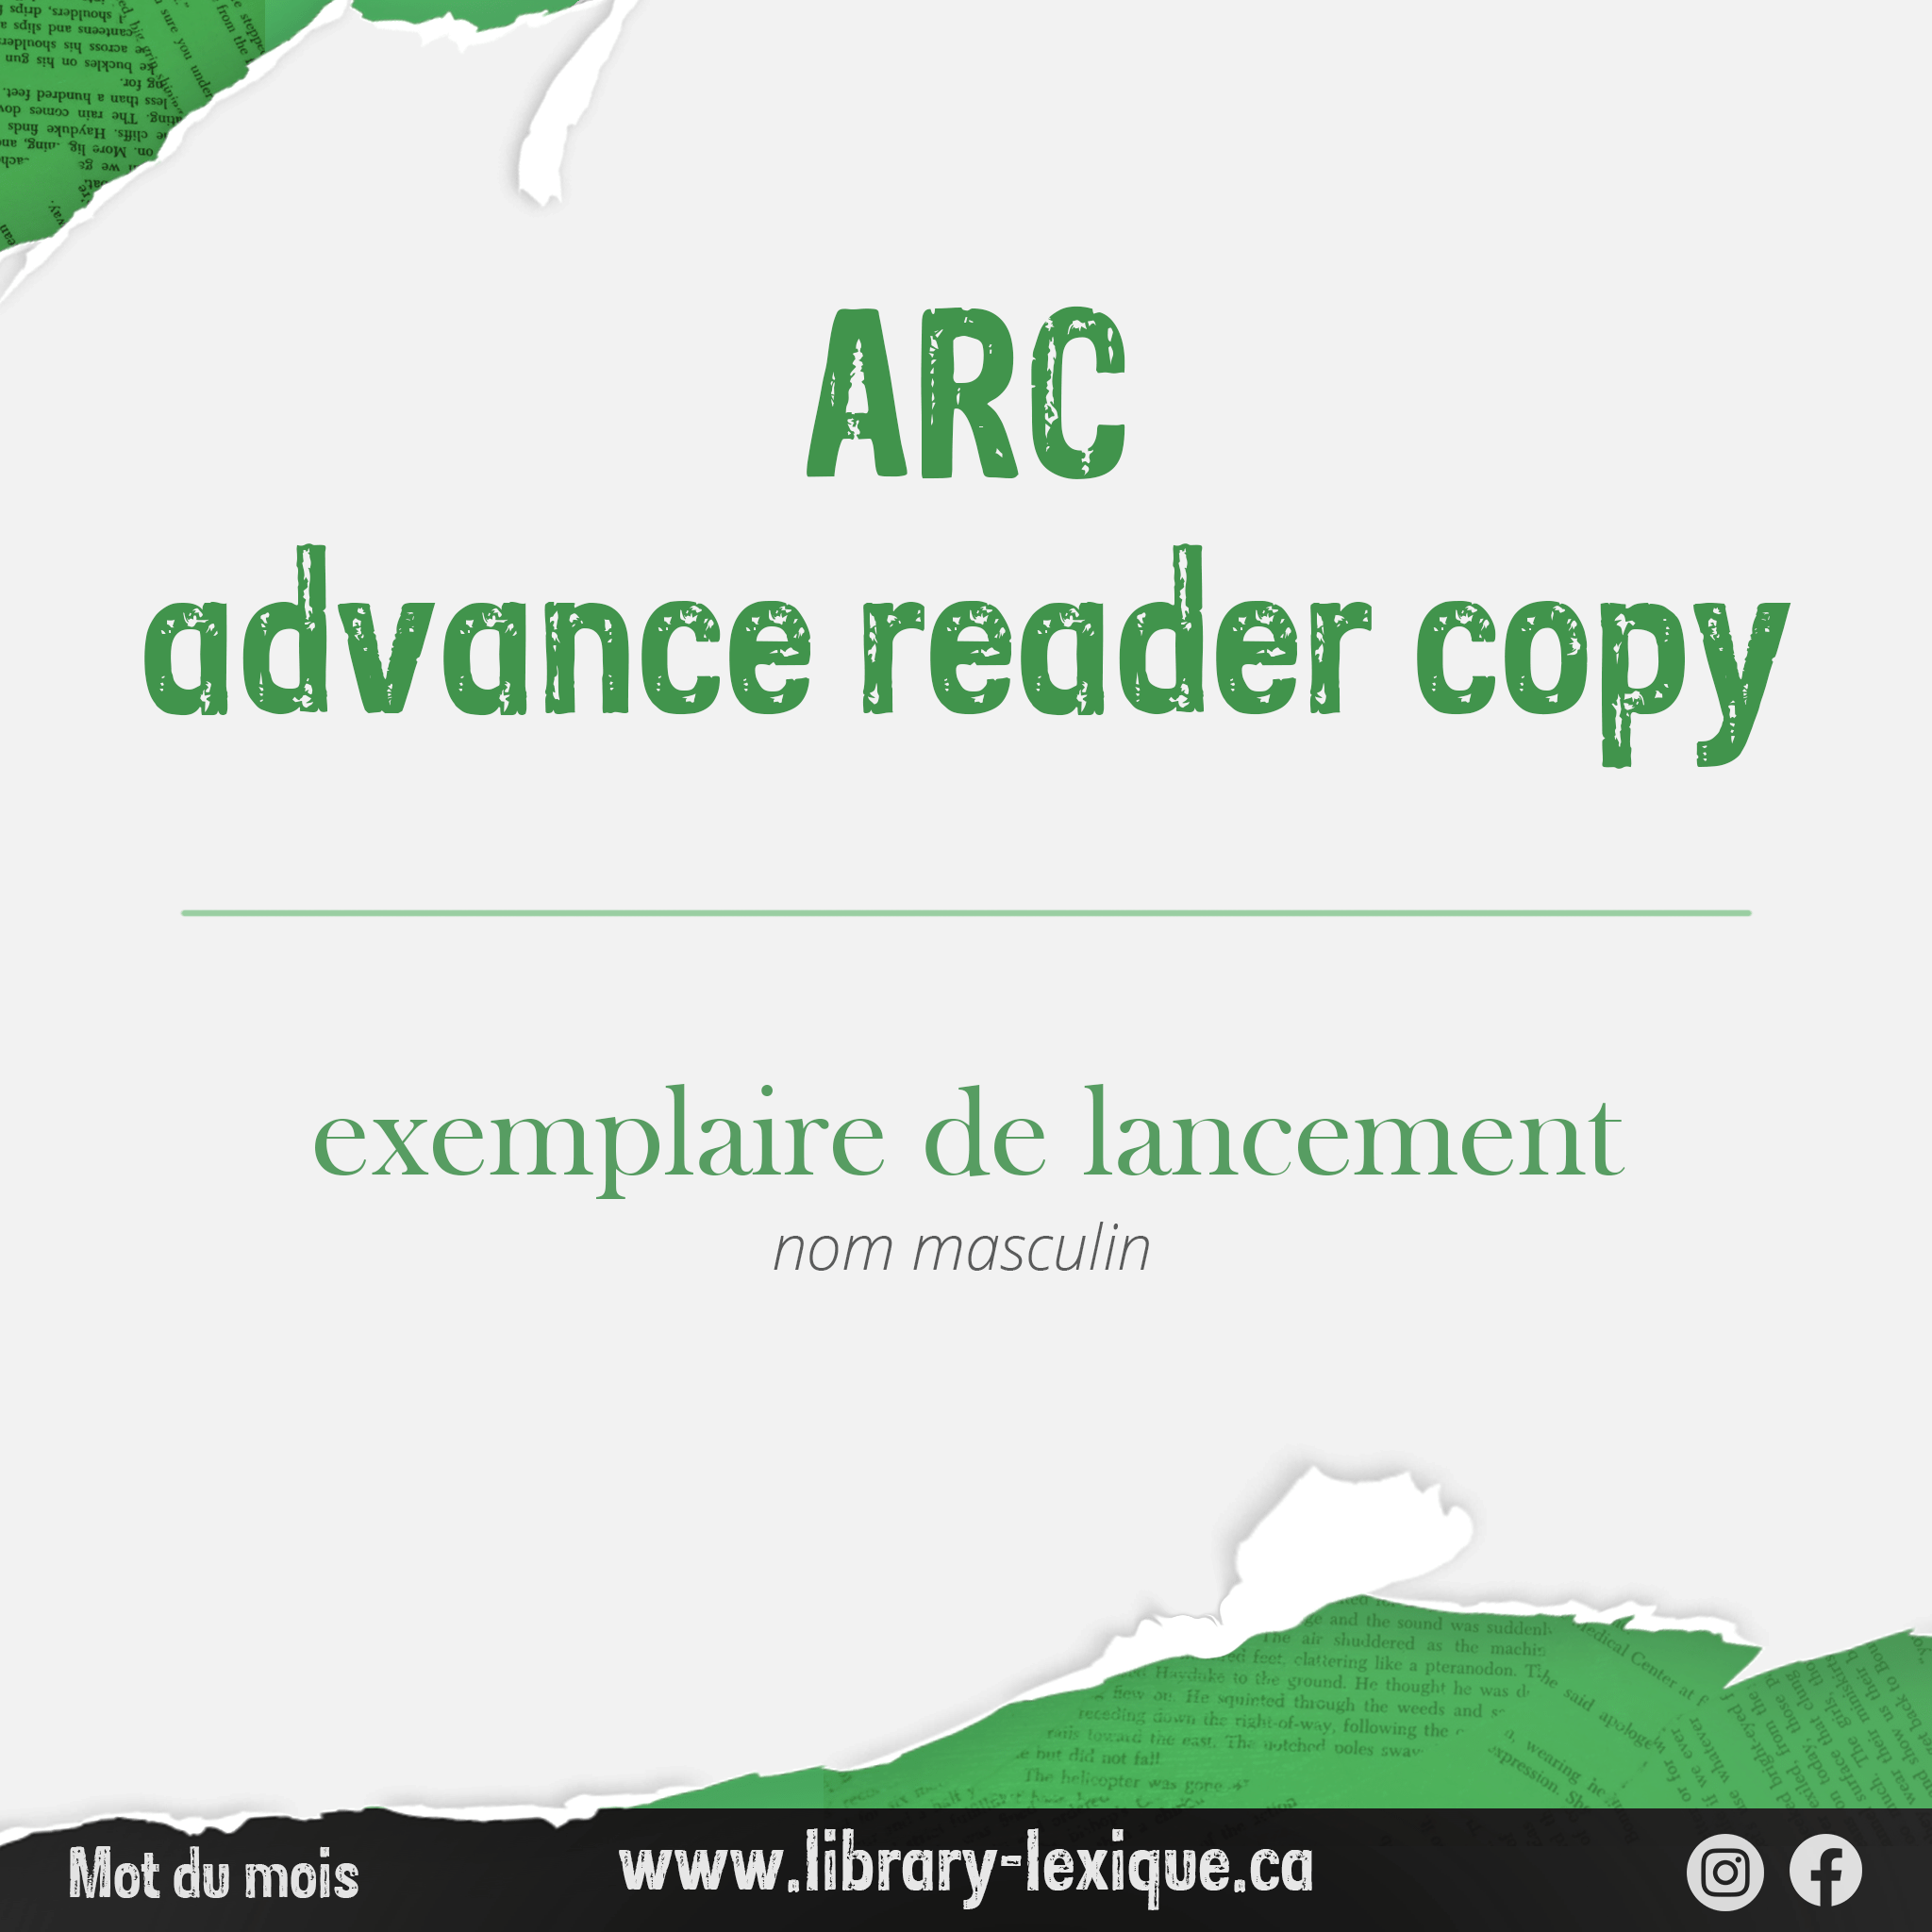 Grpahic showing the translation for "advanced reader copy" in French